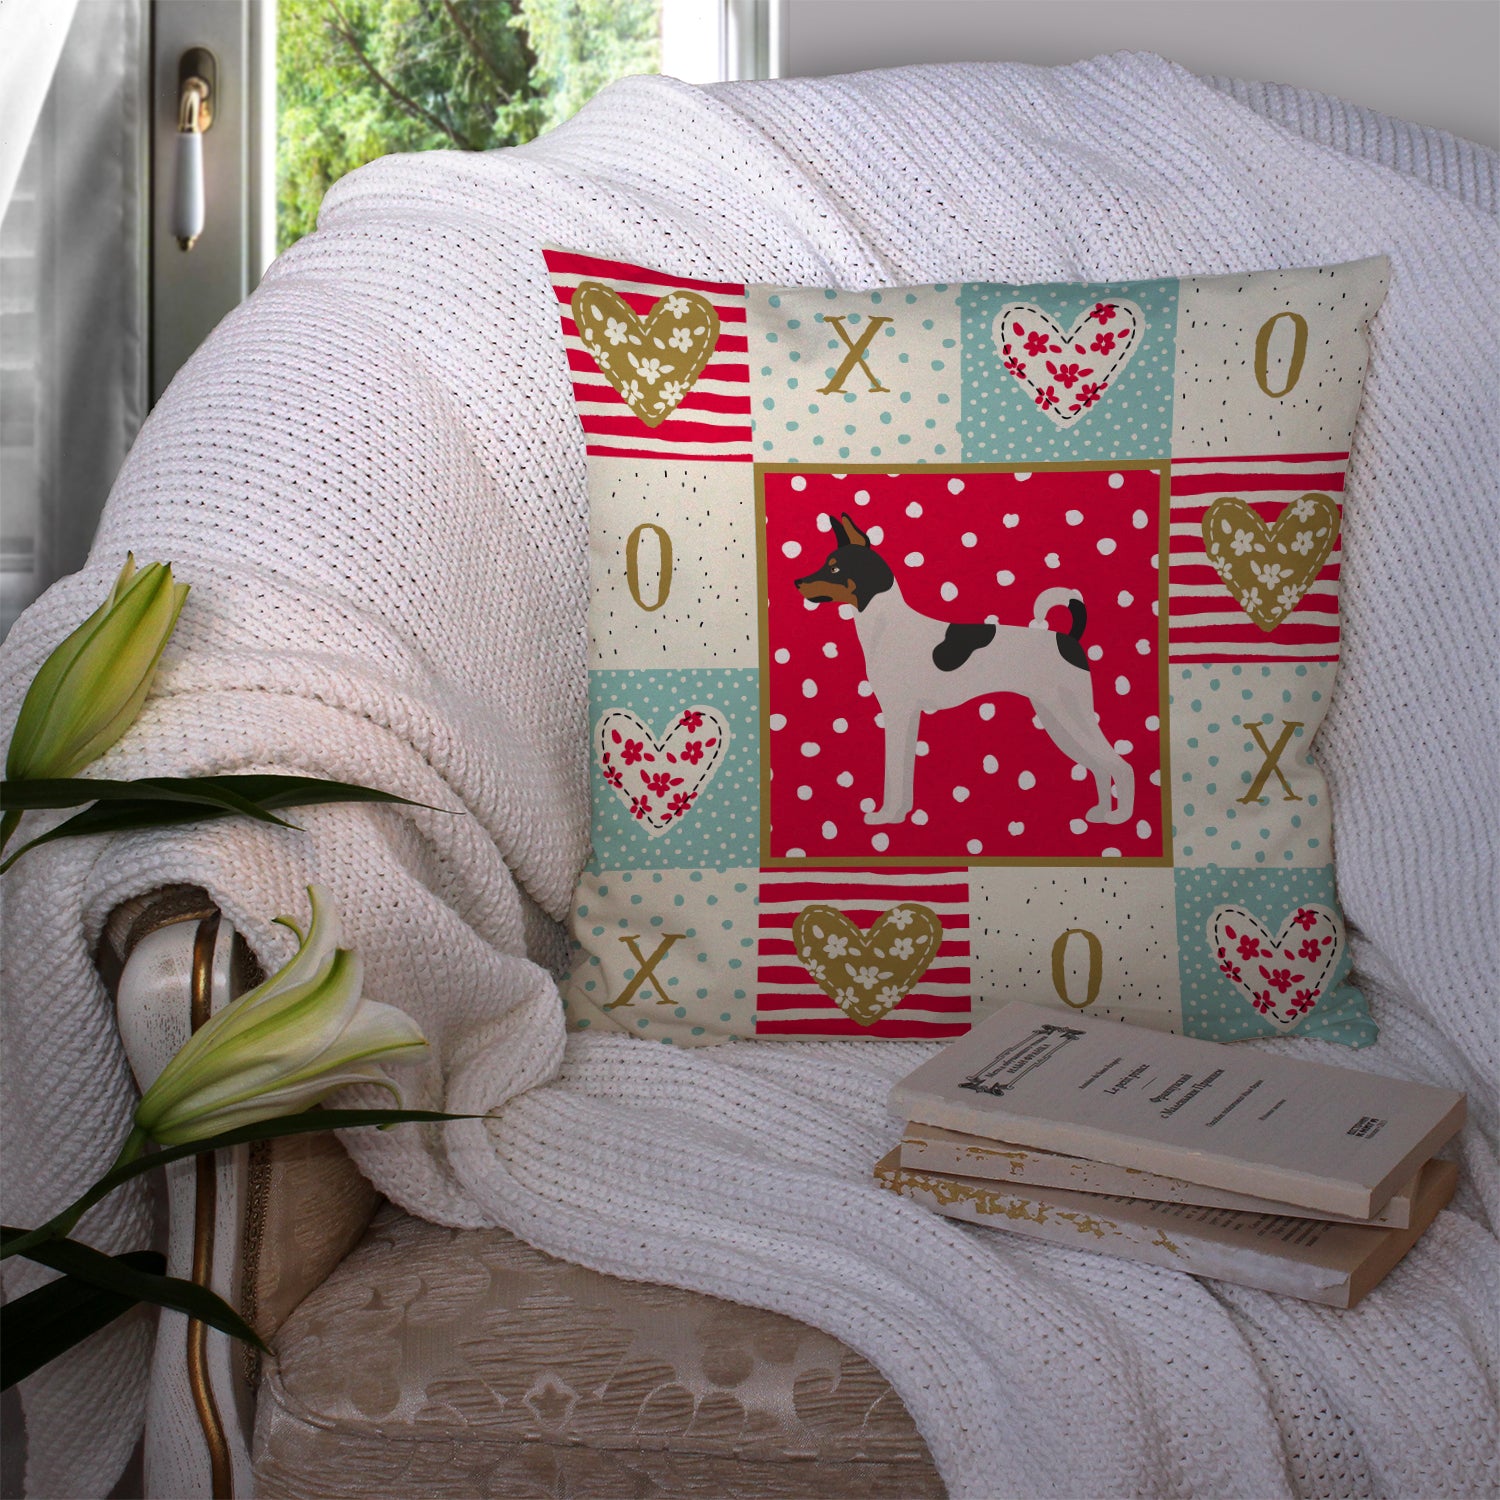 Toy Fox Terrier Love Fabric Decorative Pillow CK5899PW1414 - the-store.com